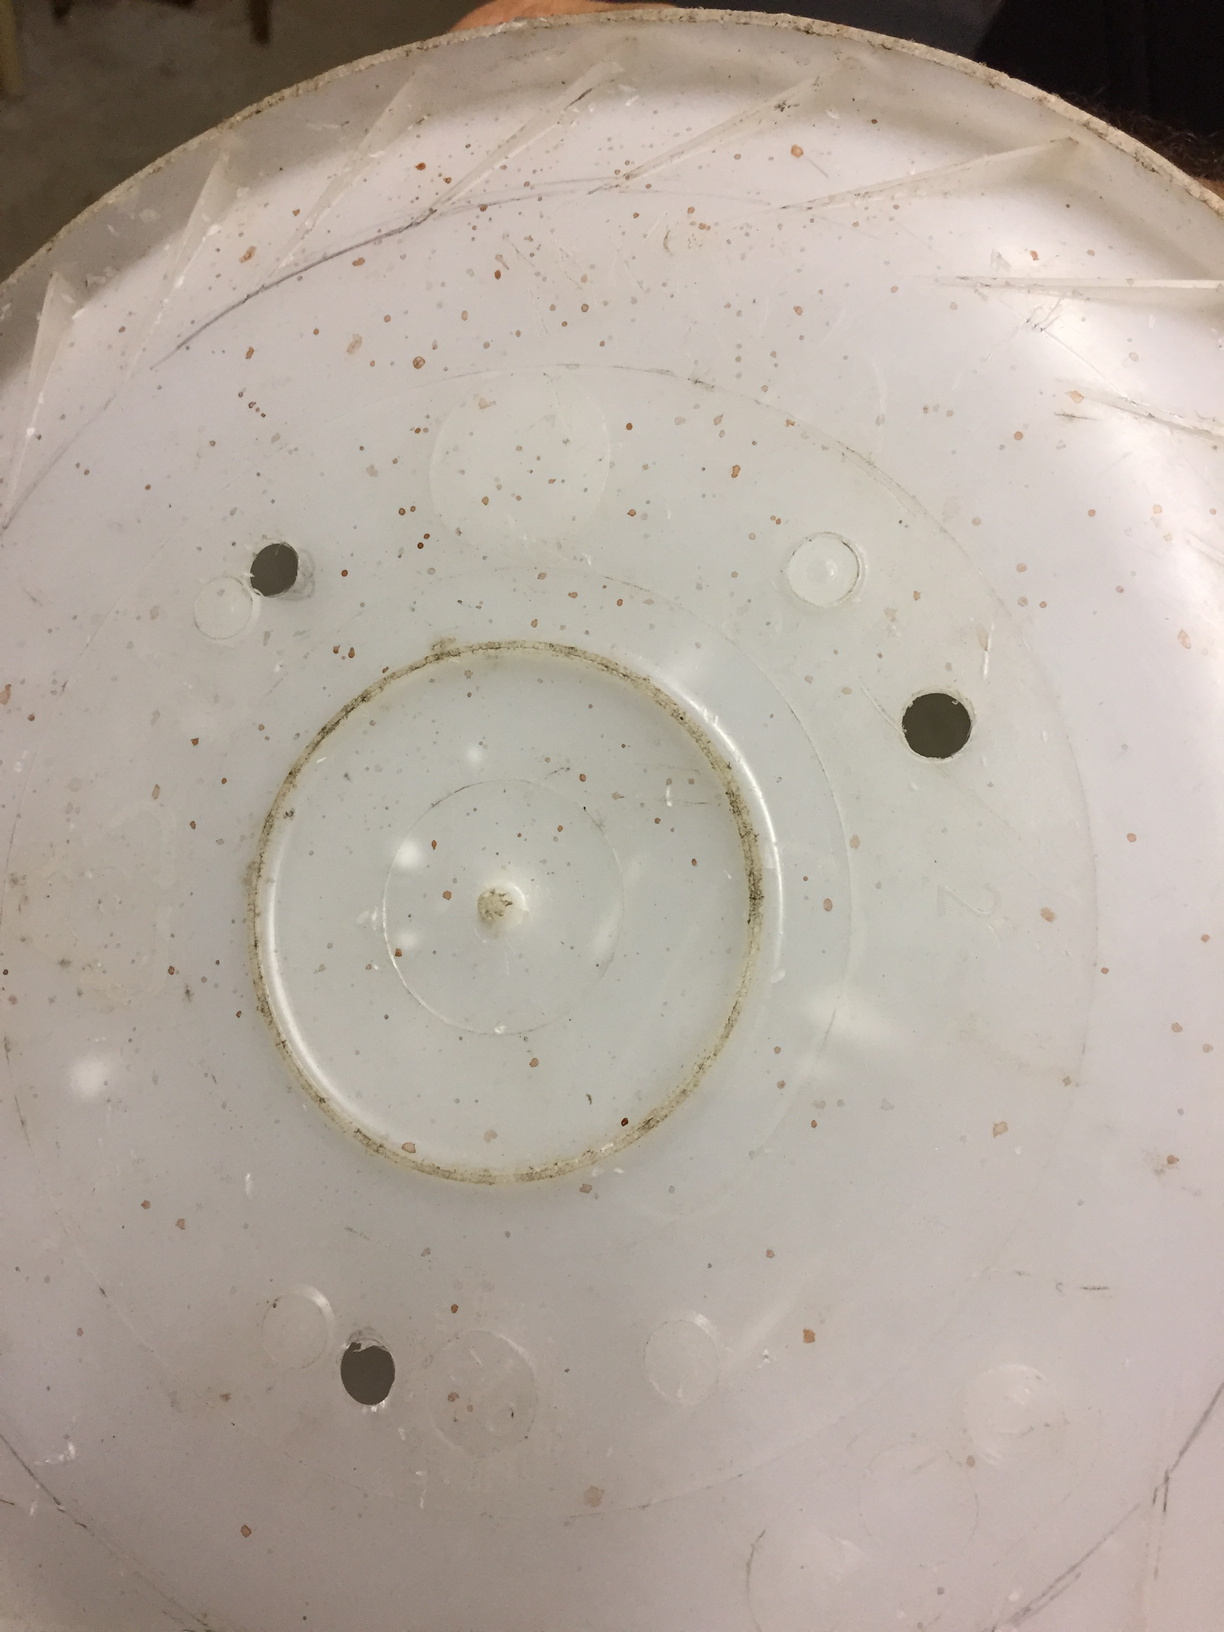 Holes drilled in the bottom of 20L bucket I had in the garage, ready for the chicken nipples to be installed.